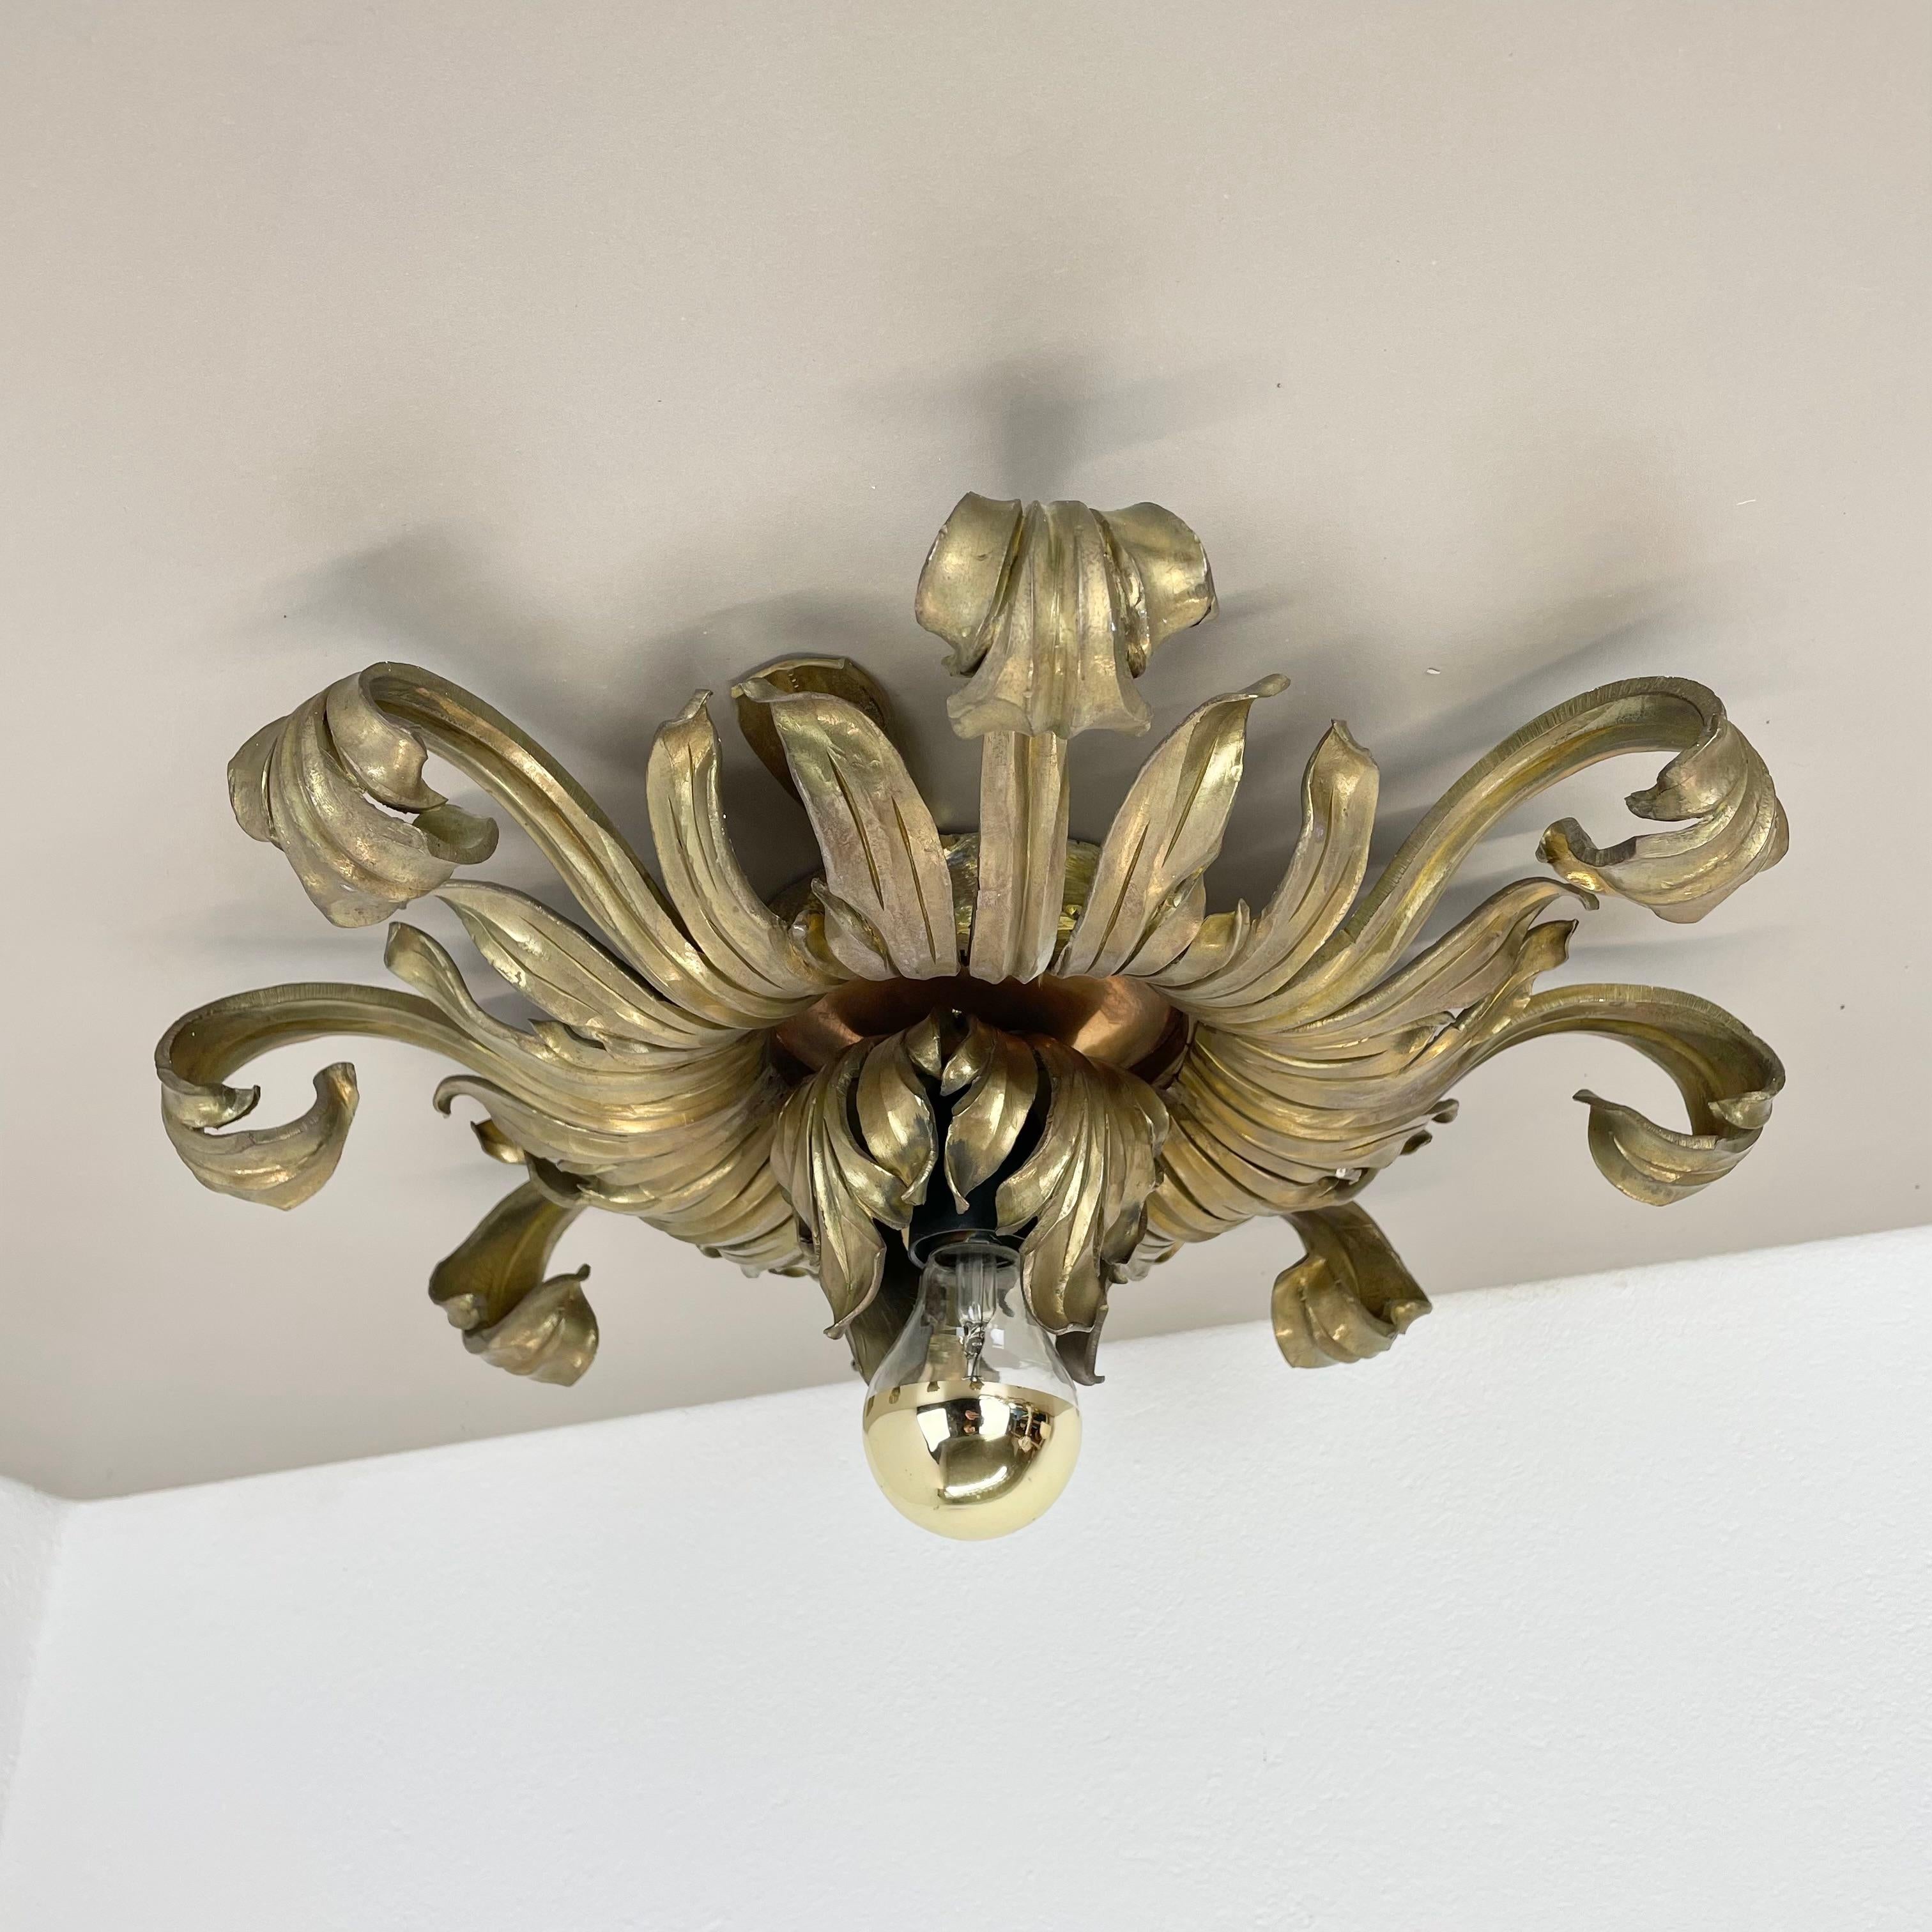 Article:

Wall light, ceiling light


Producer:

Origin Italy in the manner of Stilnovo, Gio Ponti



Age:

1950s



This modernist light was produced in Italy in the 1970s. It is made from solid brass in form of a flower with with leaf elements